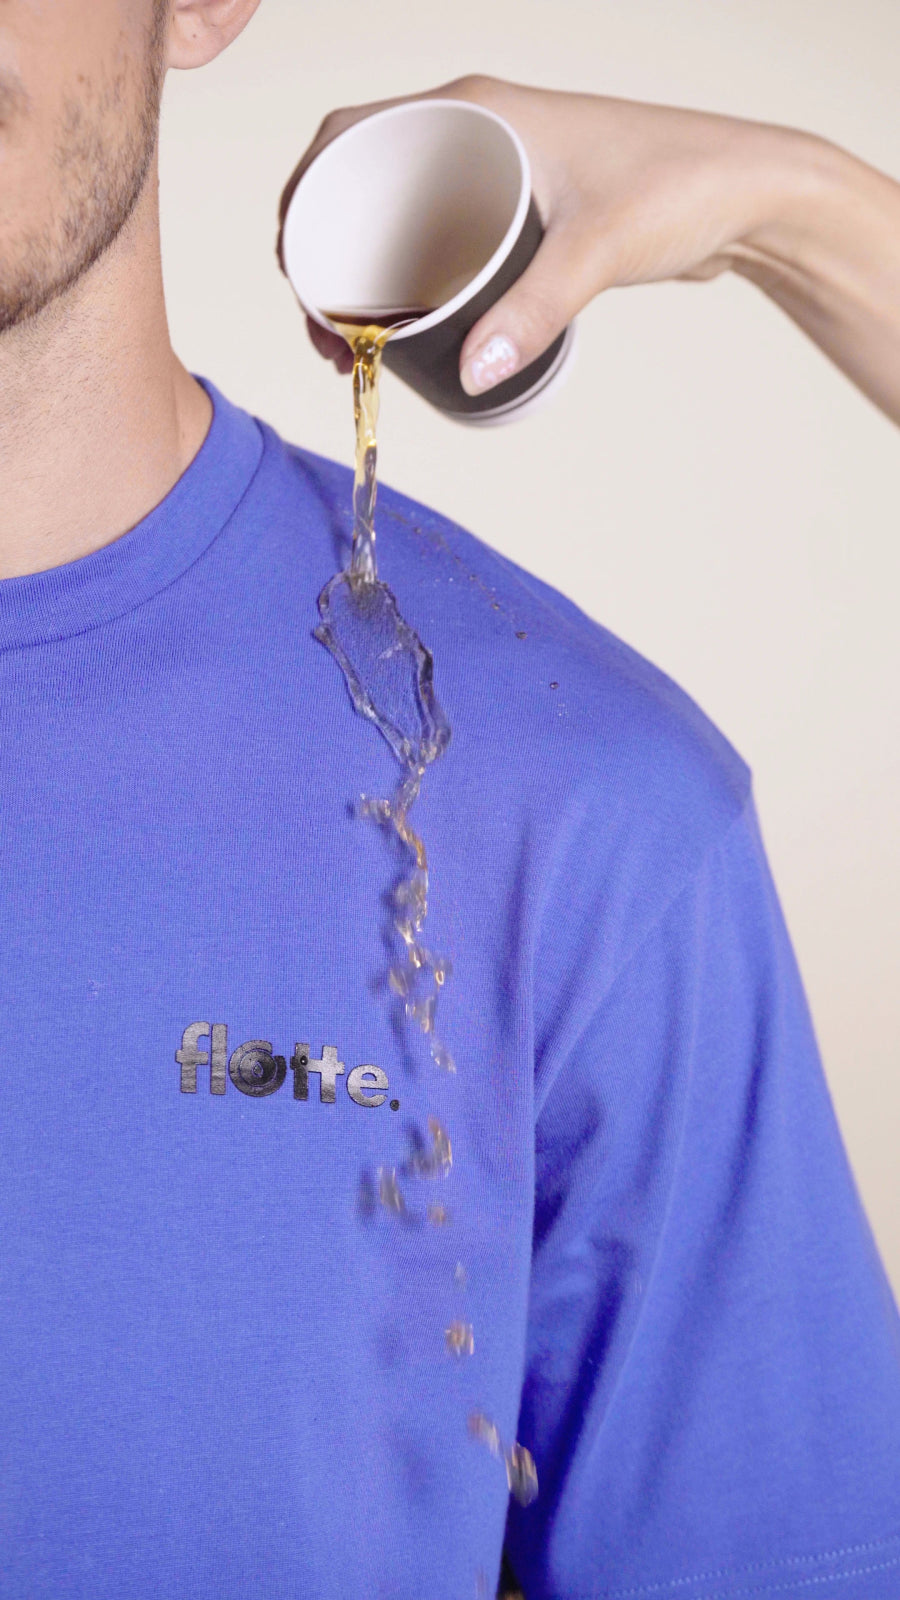 Temple water-repellent T-shirt in 100% cotton, made in Portugal